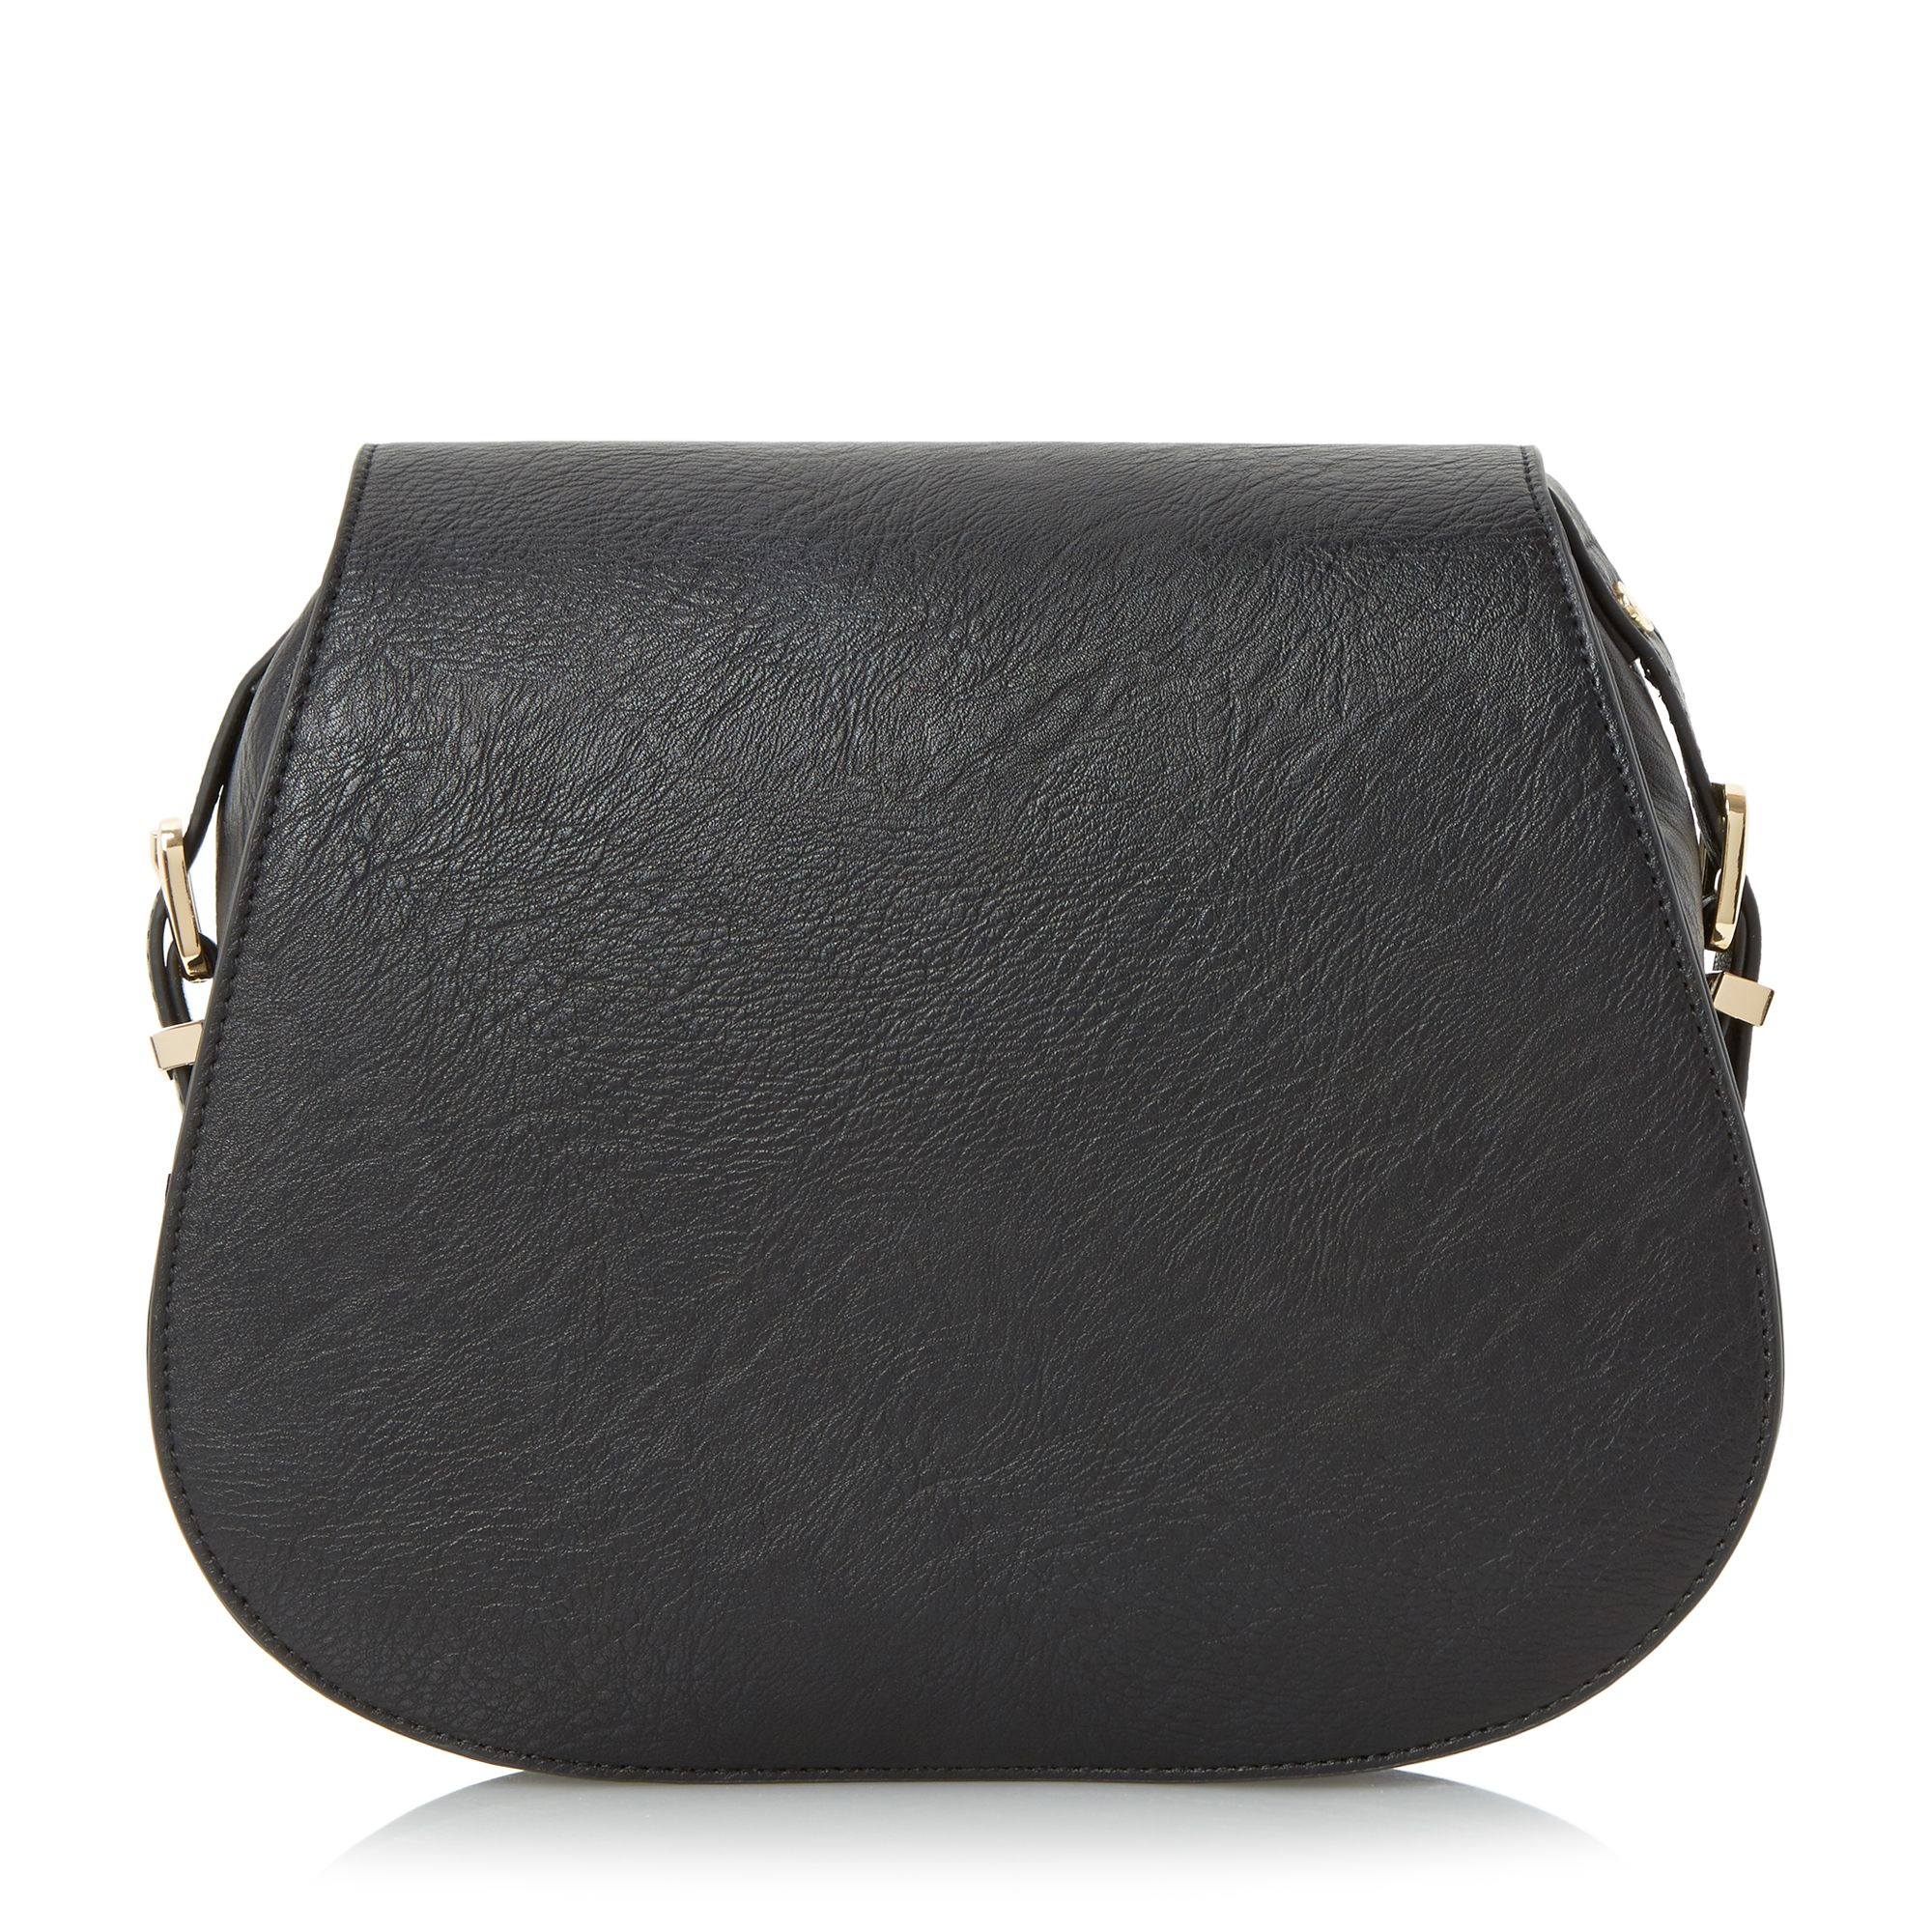 Dune Synthetic Dessica Cross Body Bag in Black - Lyst